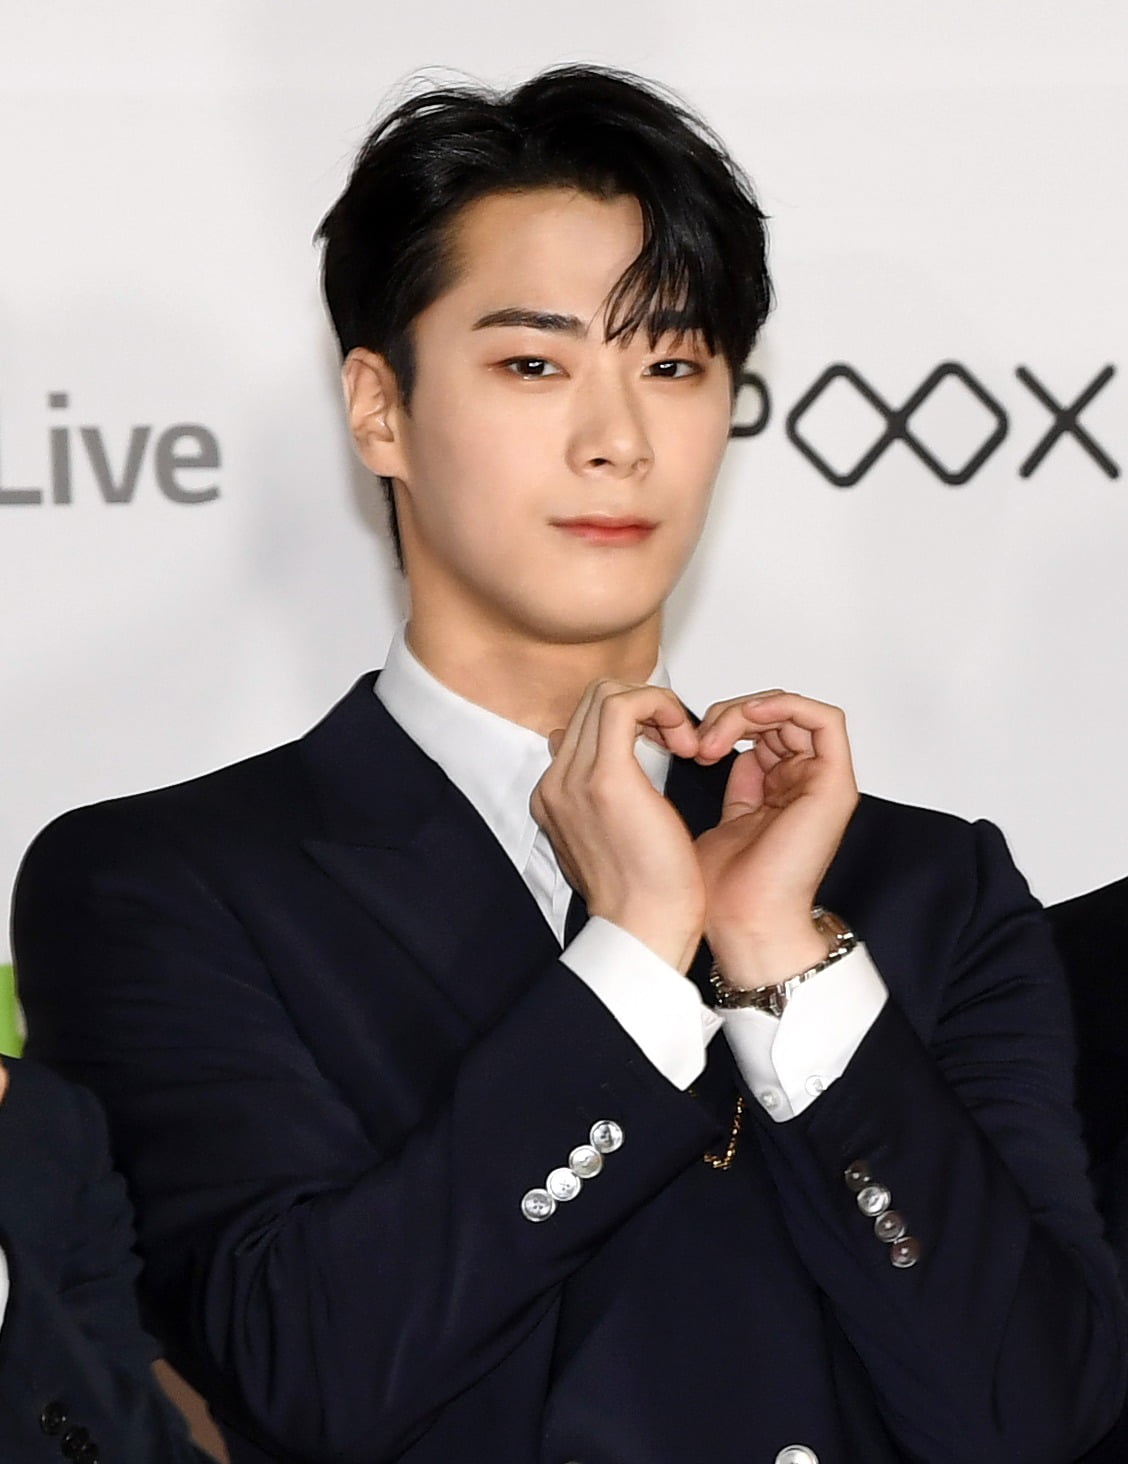 "Long-term operation plan" to prepare a memorial space for the deceased Moonbin